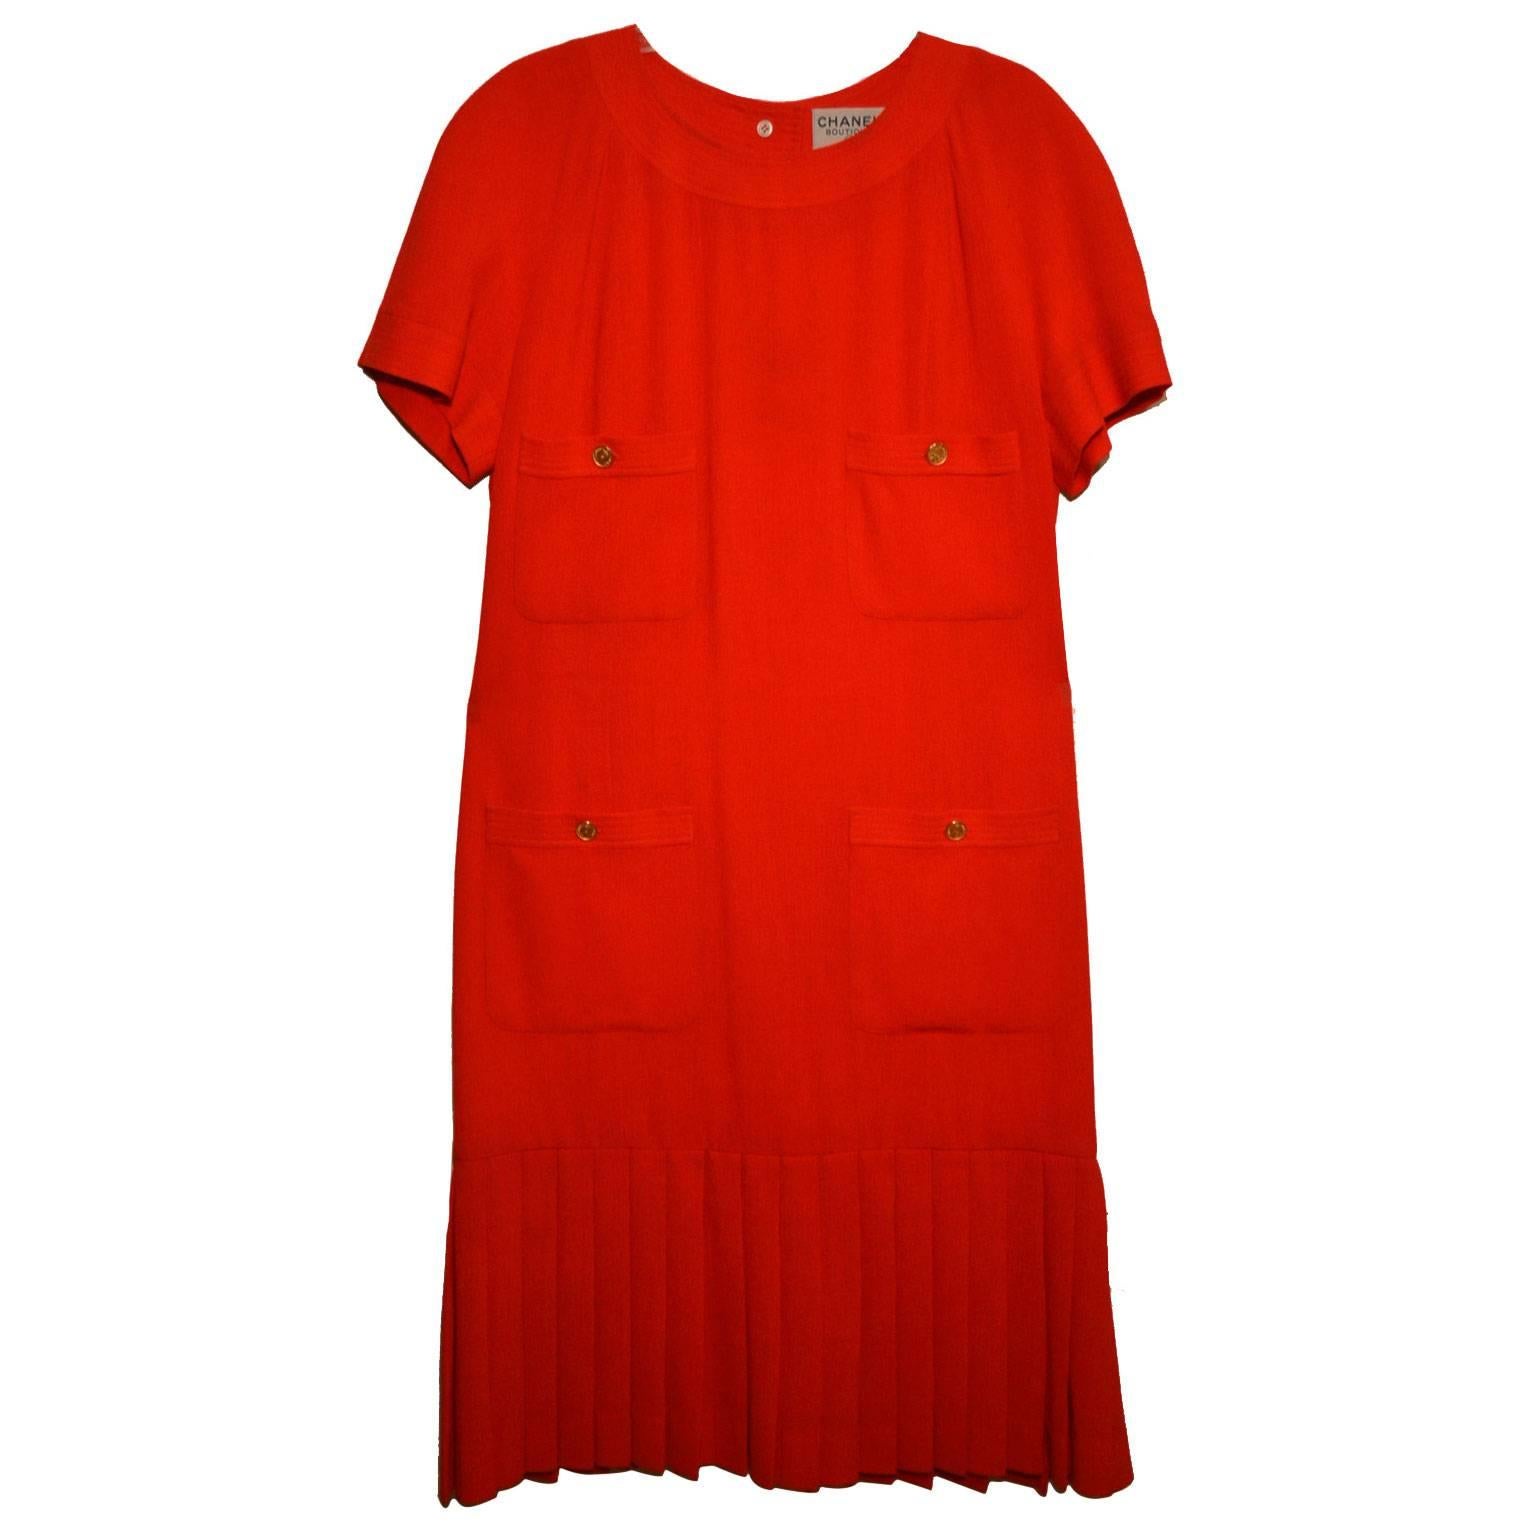 Classic Chanel 1990's Red Dress Size Large